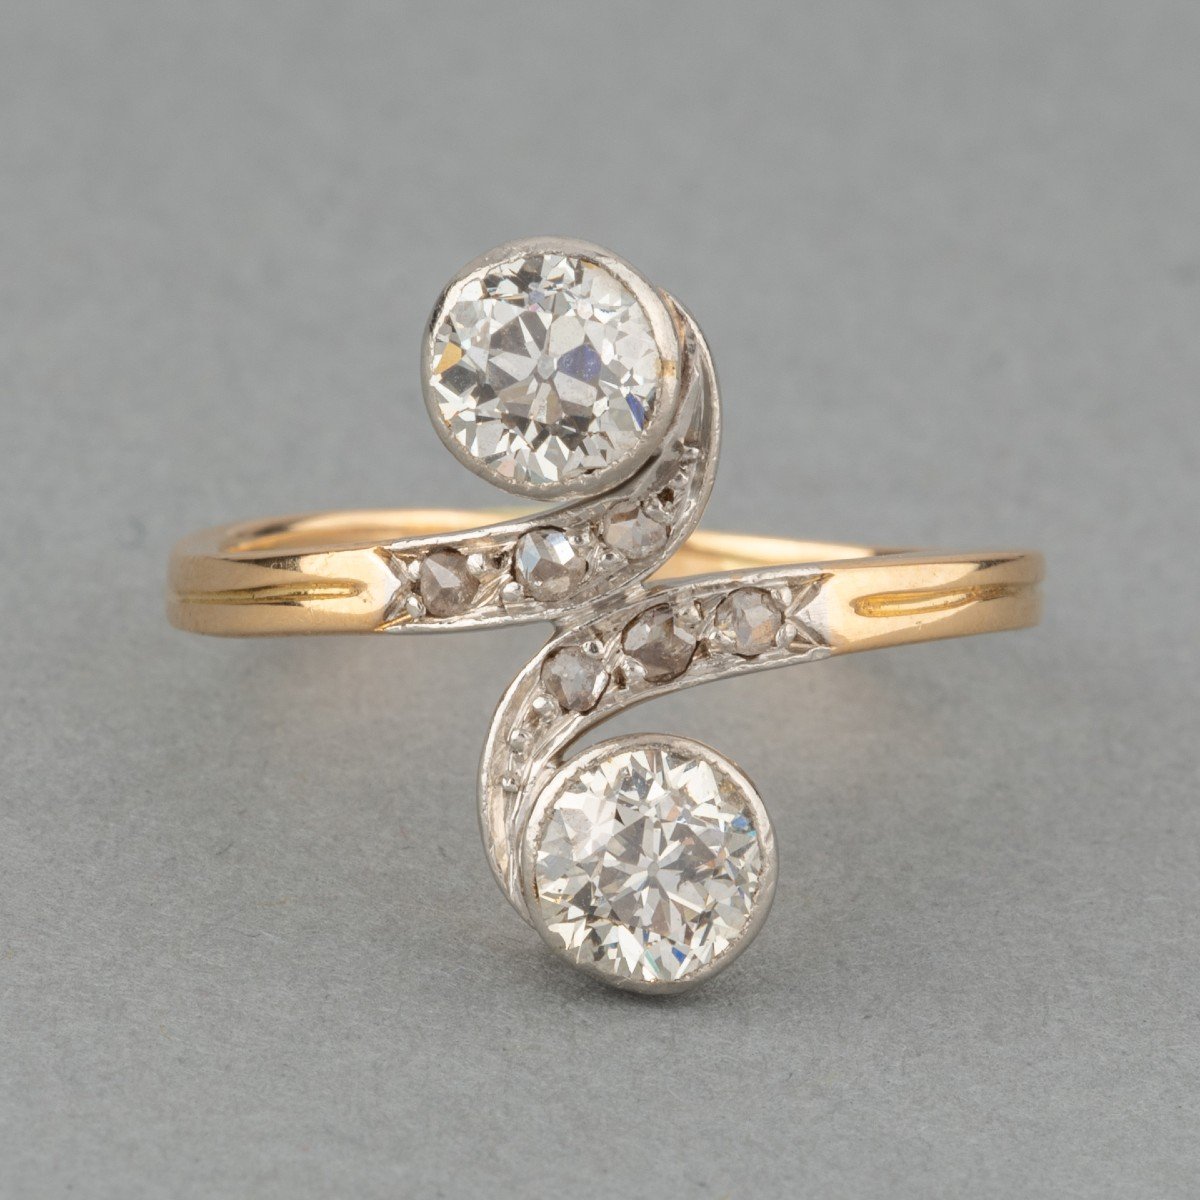 Proantic: You And Me Belle Epoque Ring In Gold And Diamonds